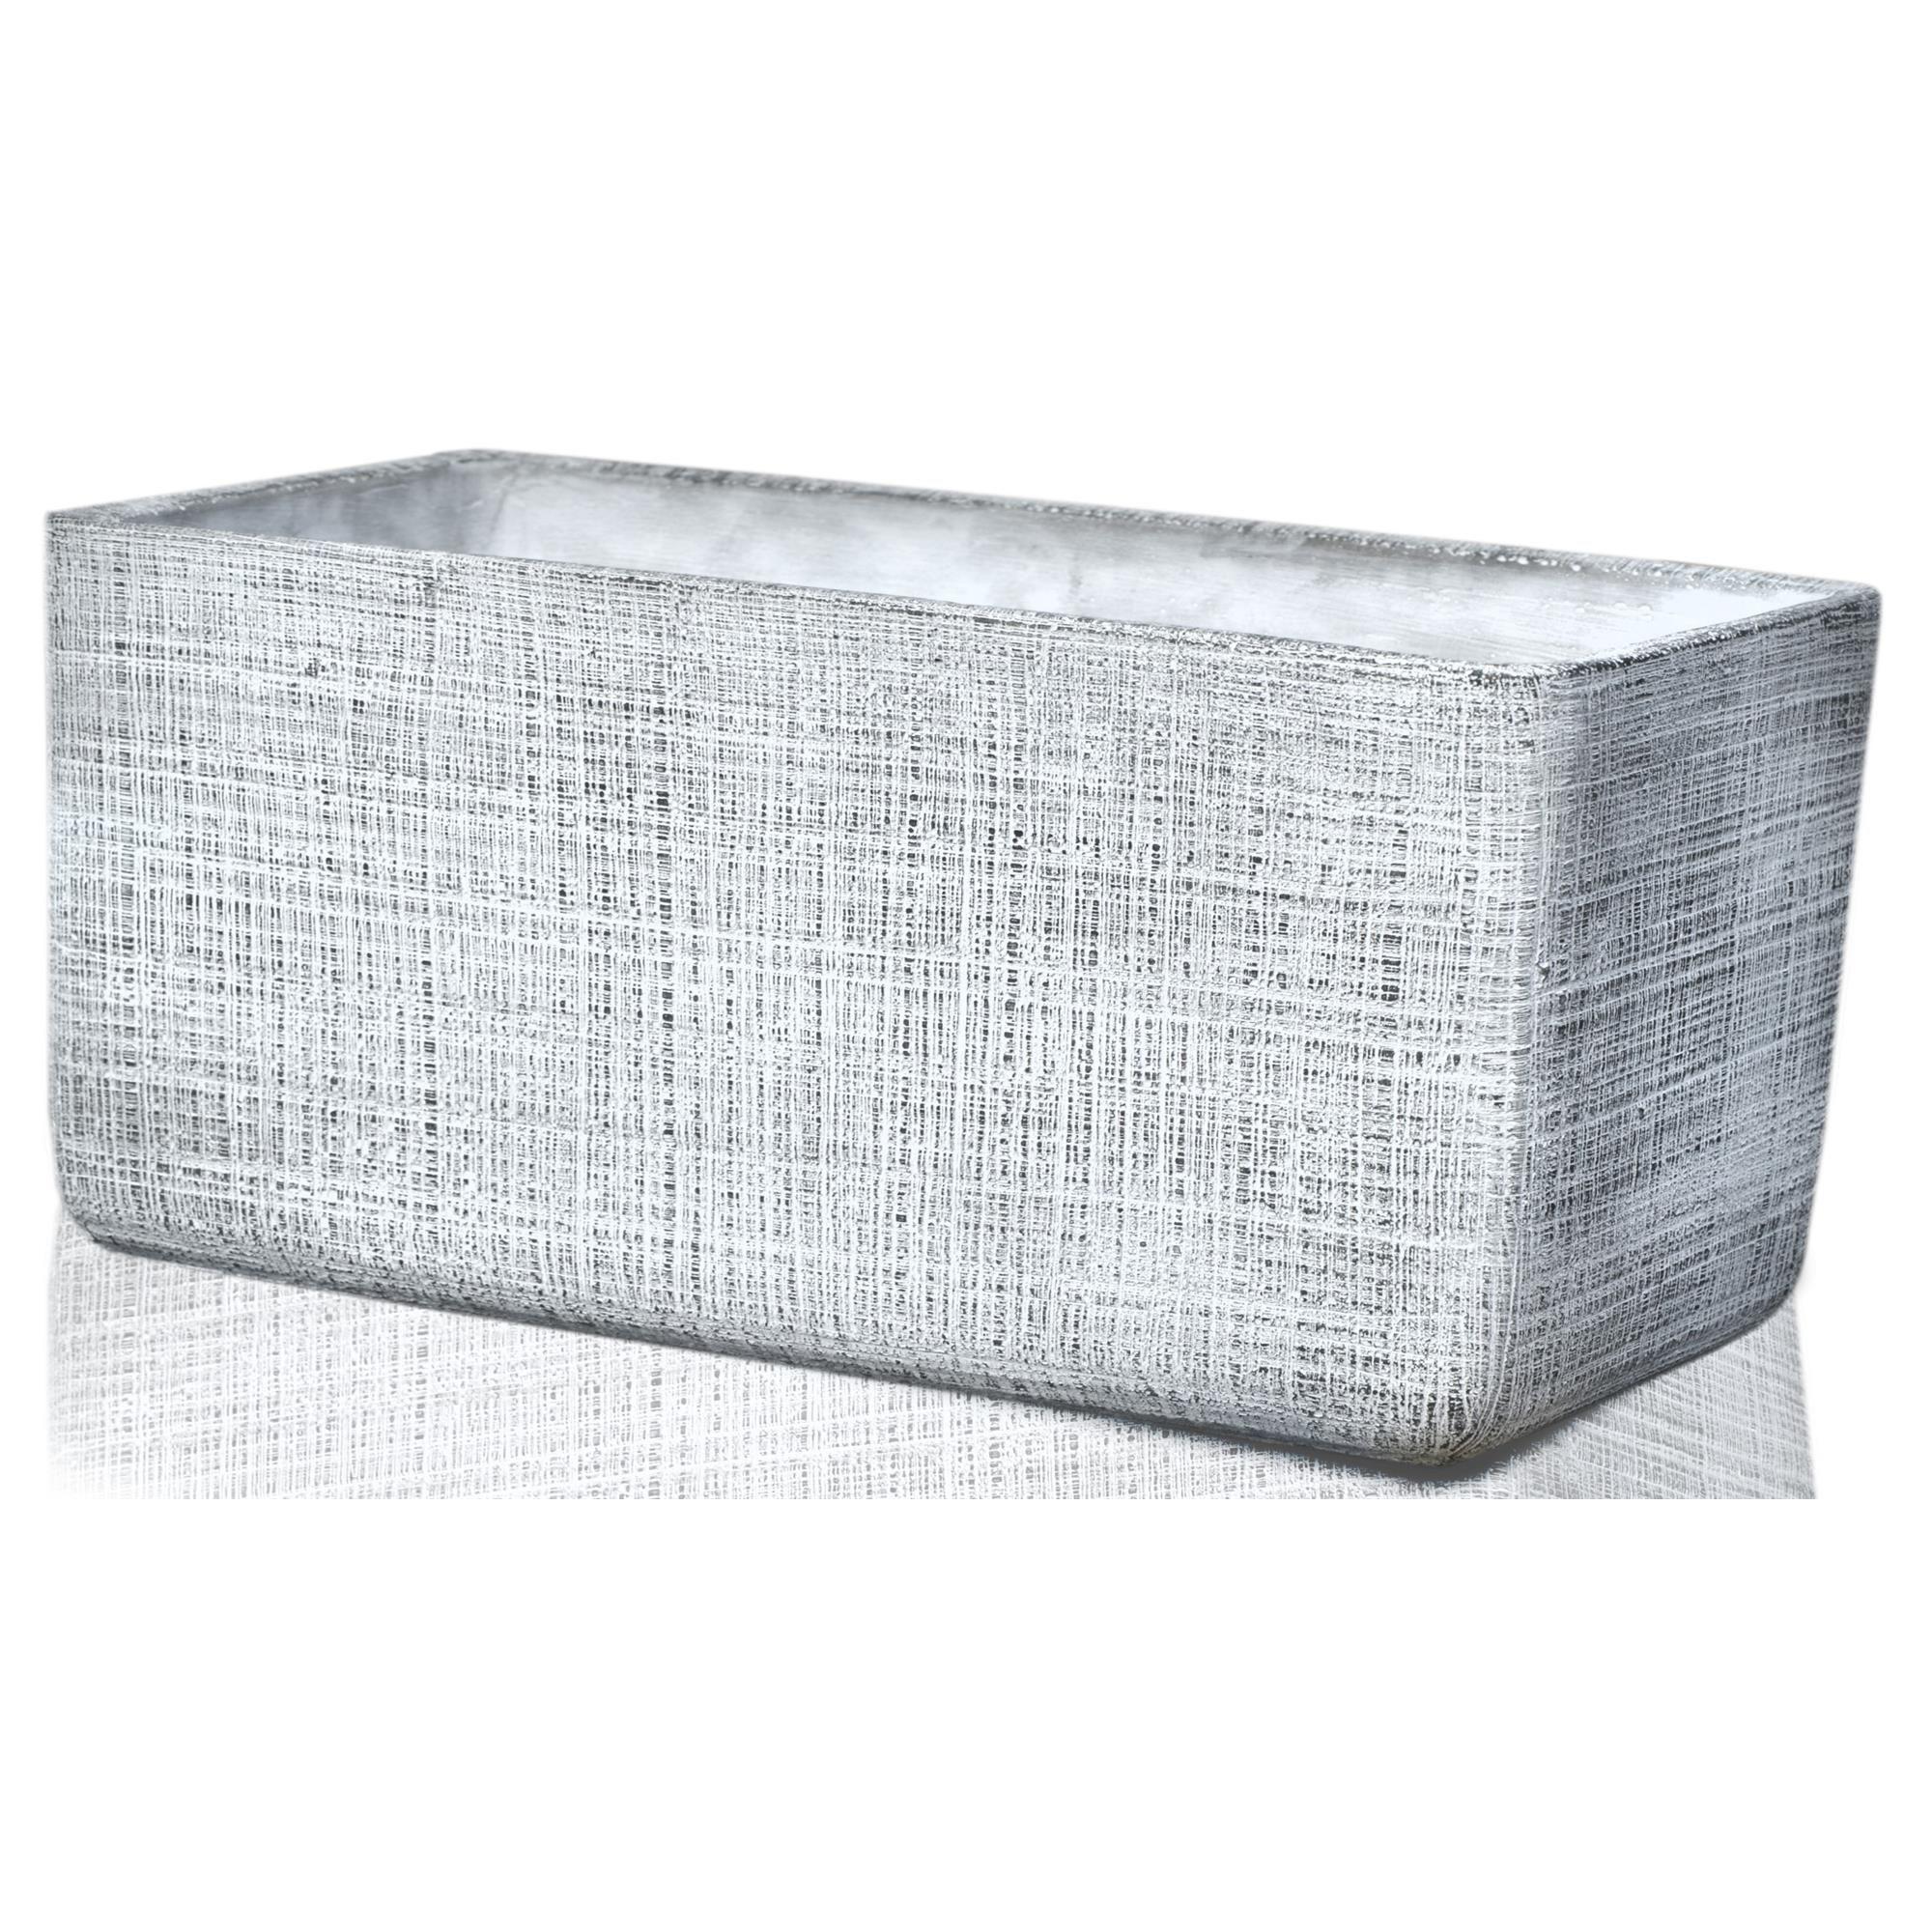 Rectangular flower pot from the Etno collection, 30x15 cm by 18 cm high